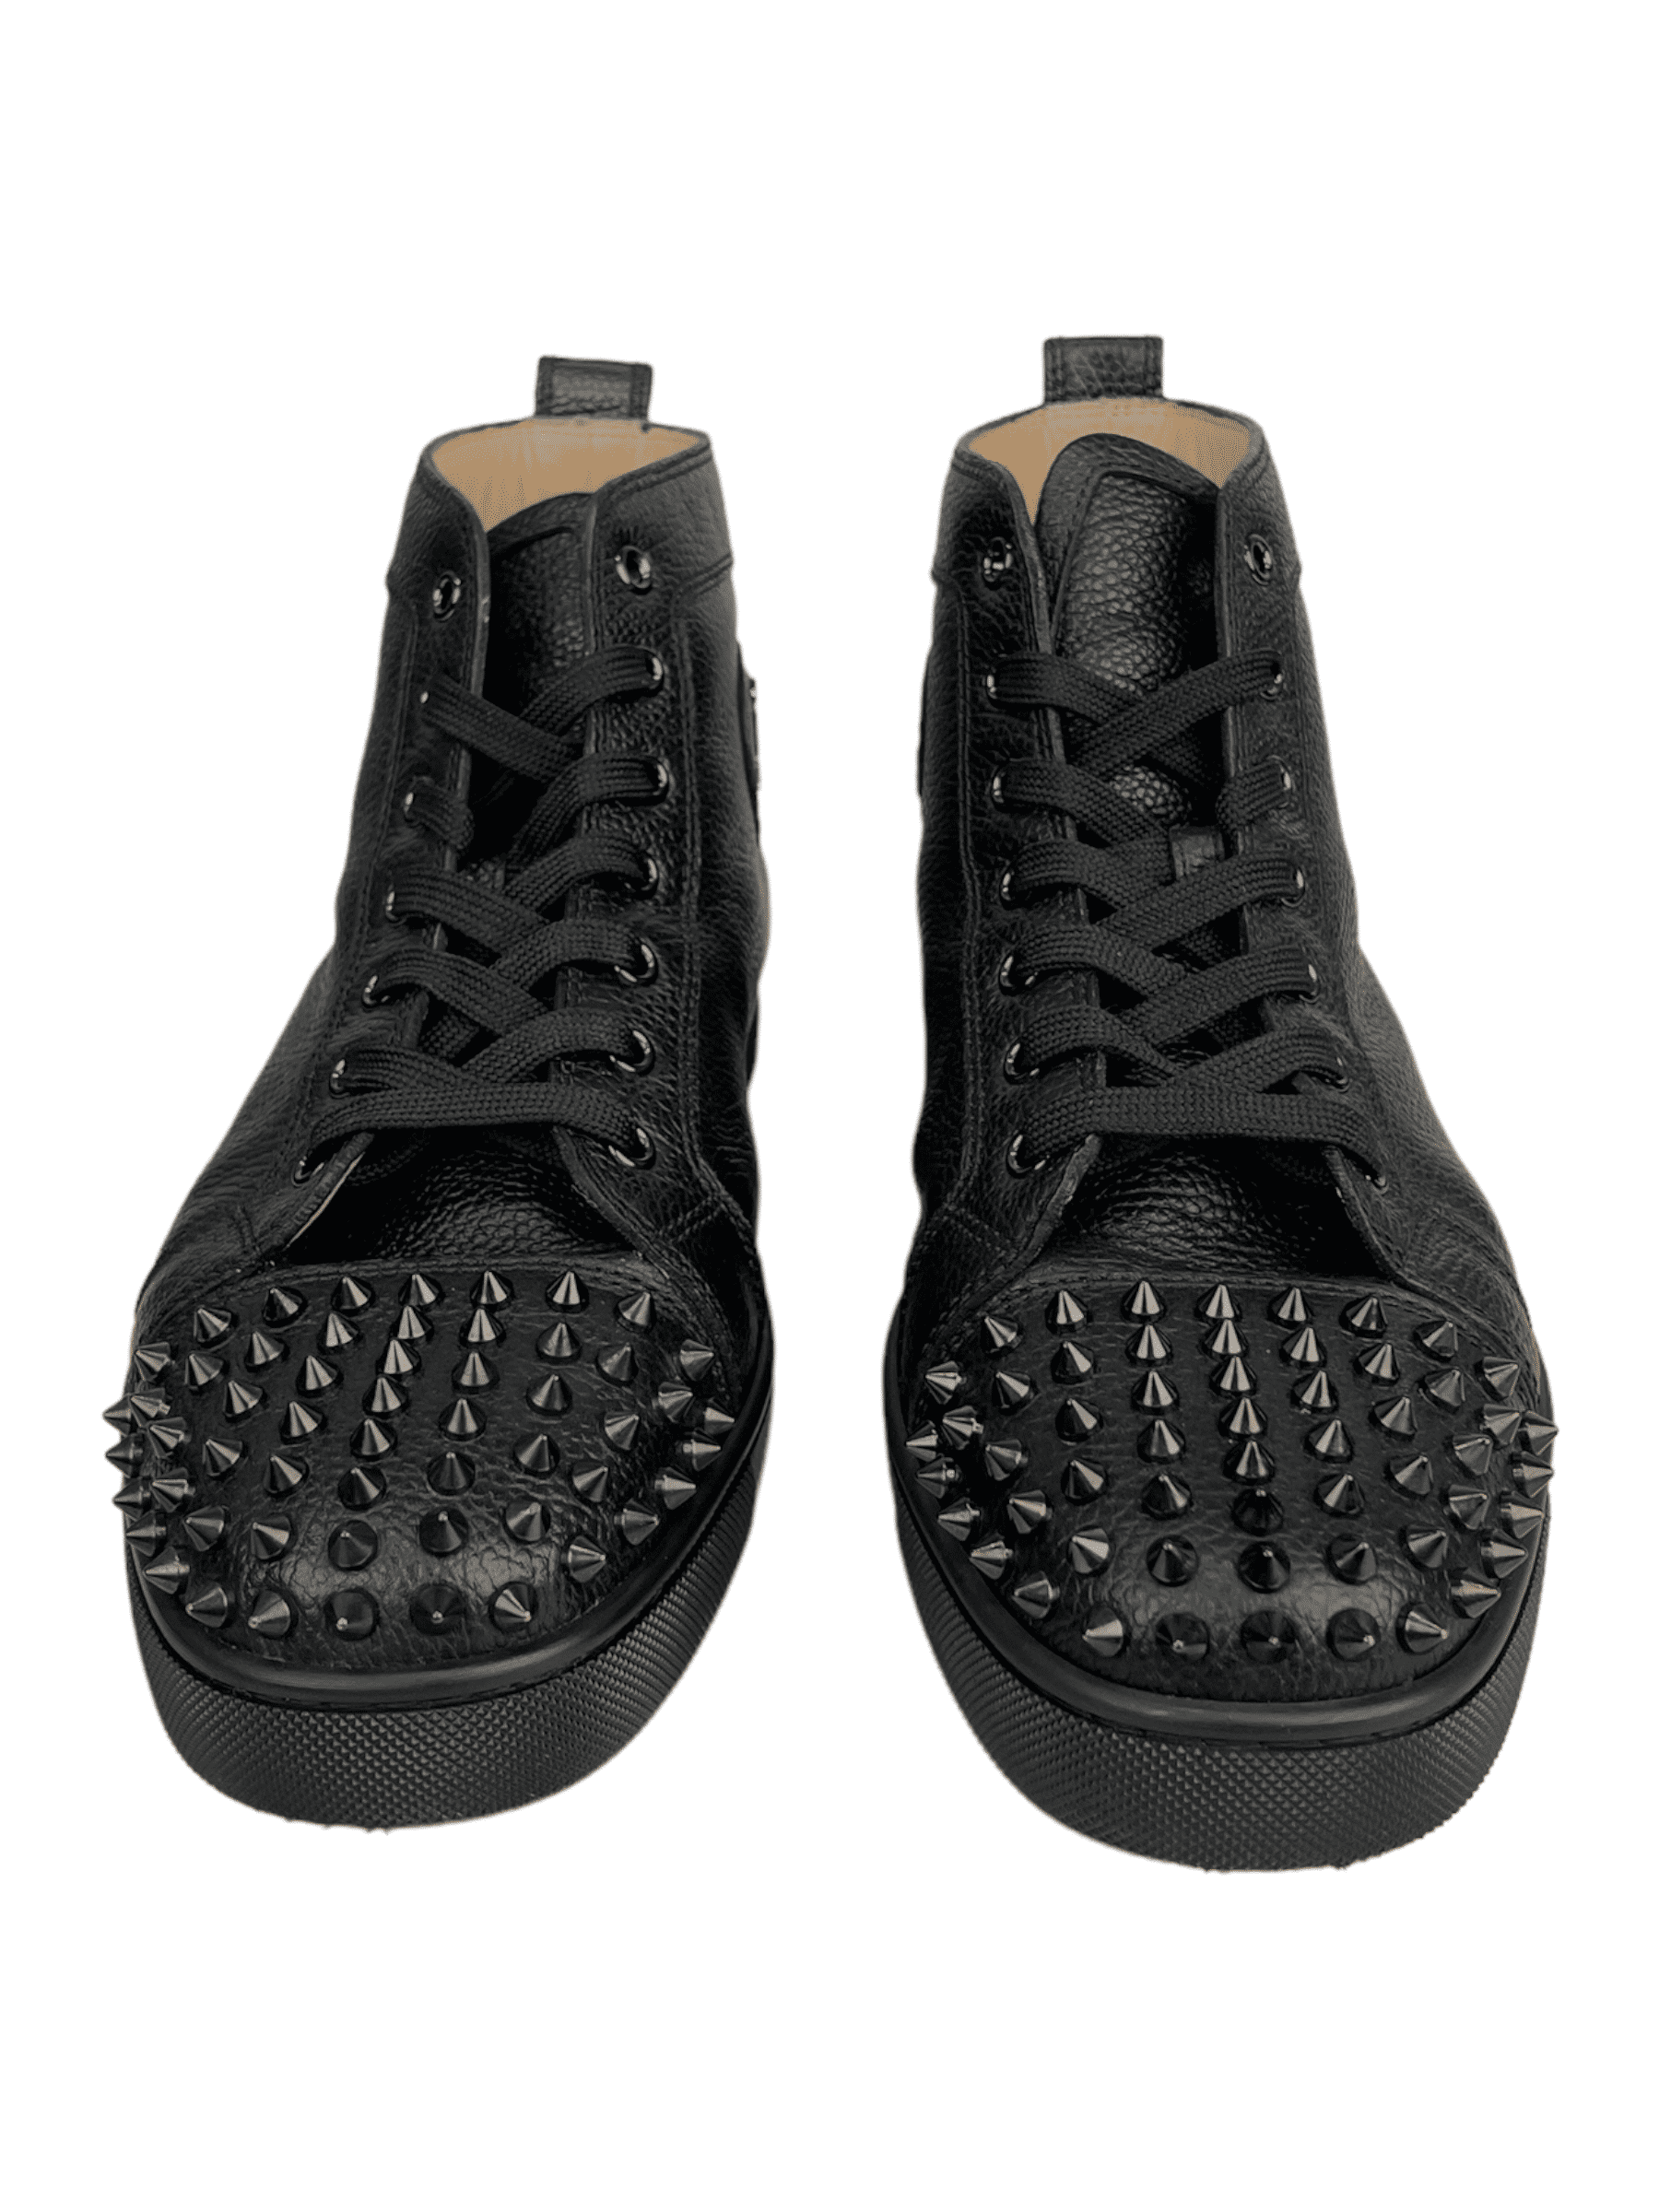 Christian Louboutin "The Lou spikes" Leather Hightop Sneakers - Genuine Design Luxury Consignment Calgary, Alberta, Canada New and Pre-Owned Clothing, Shoes, Accessories.